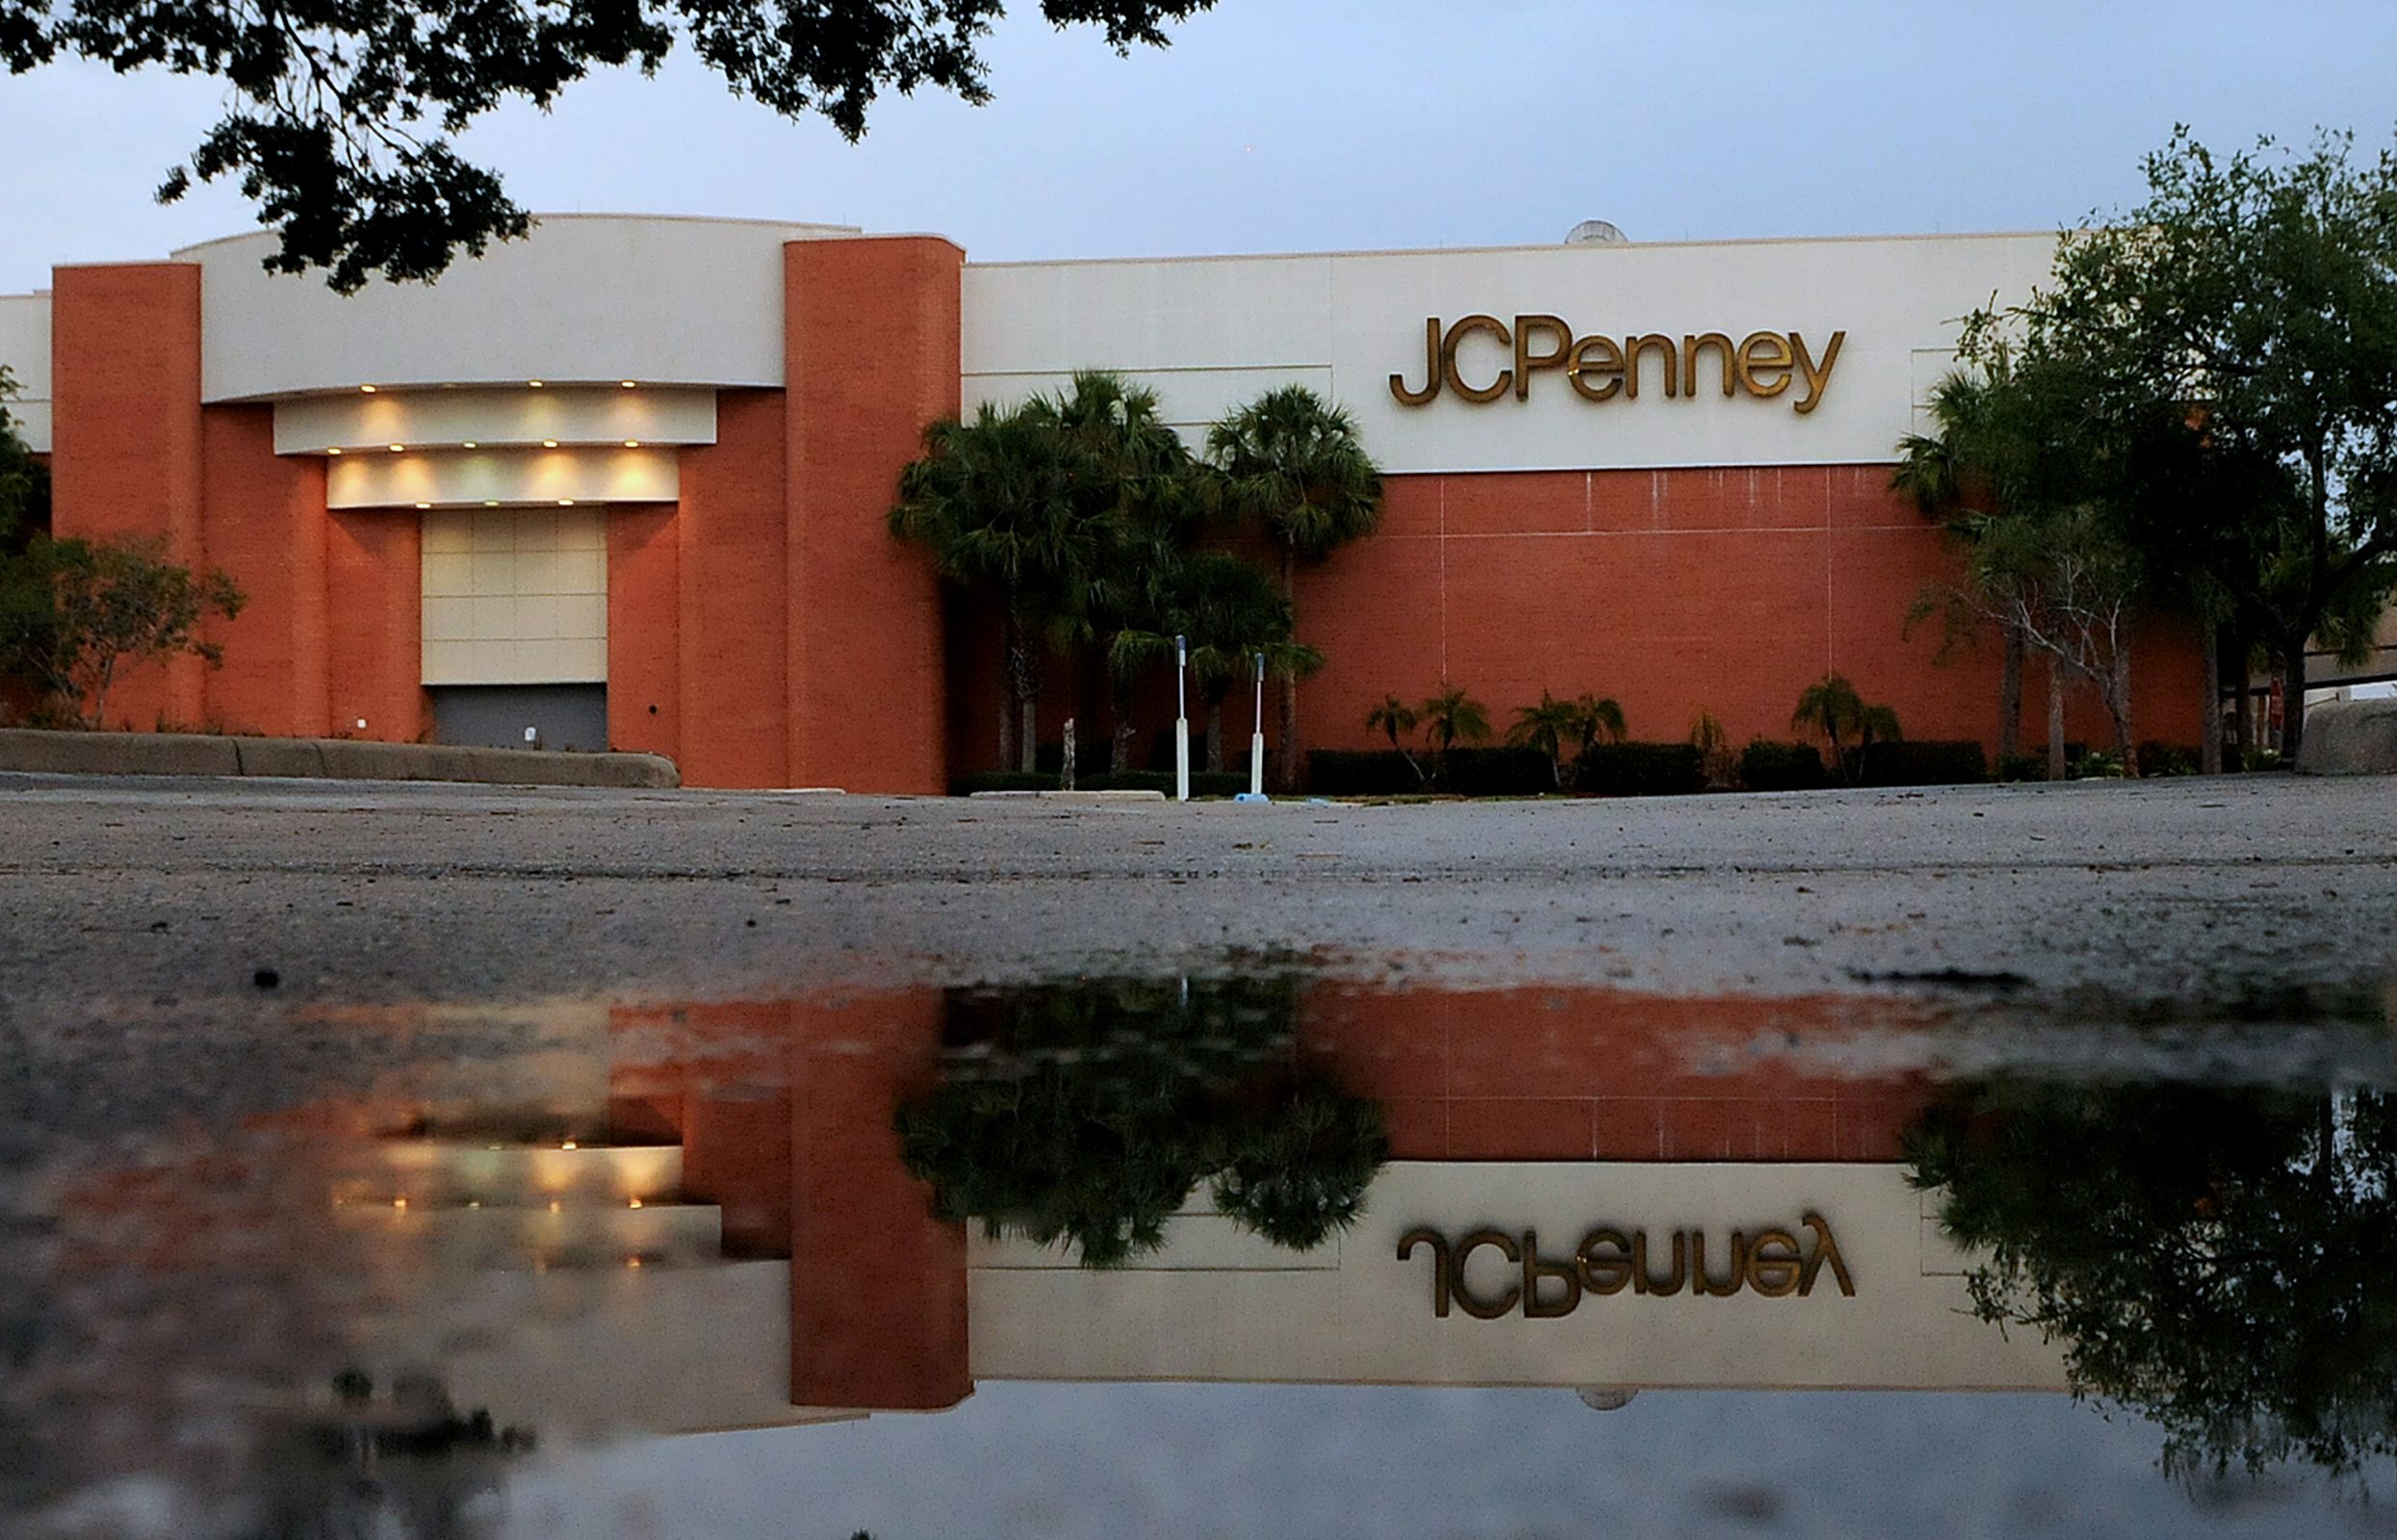 JCPenney to close Atlanta area stores - Atlanta Business Chronicle